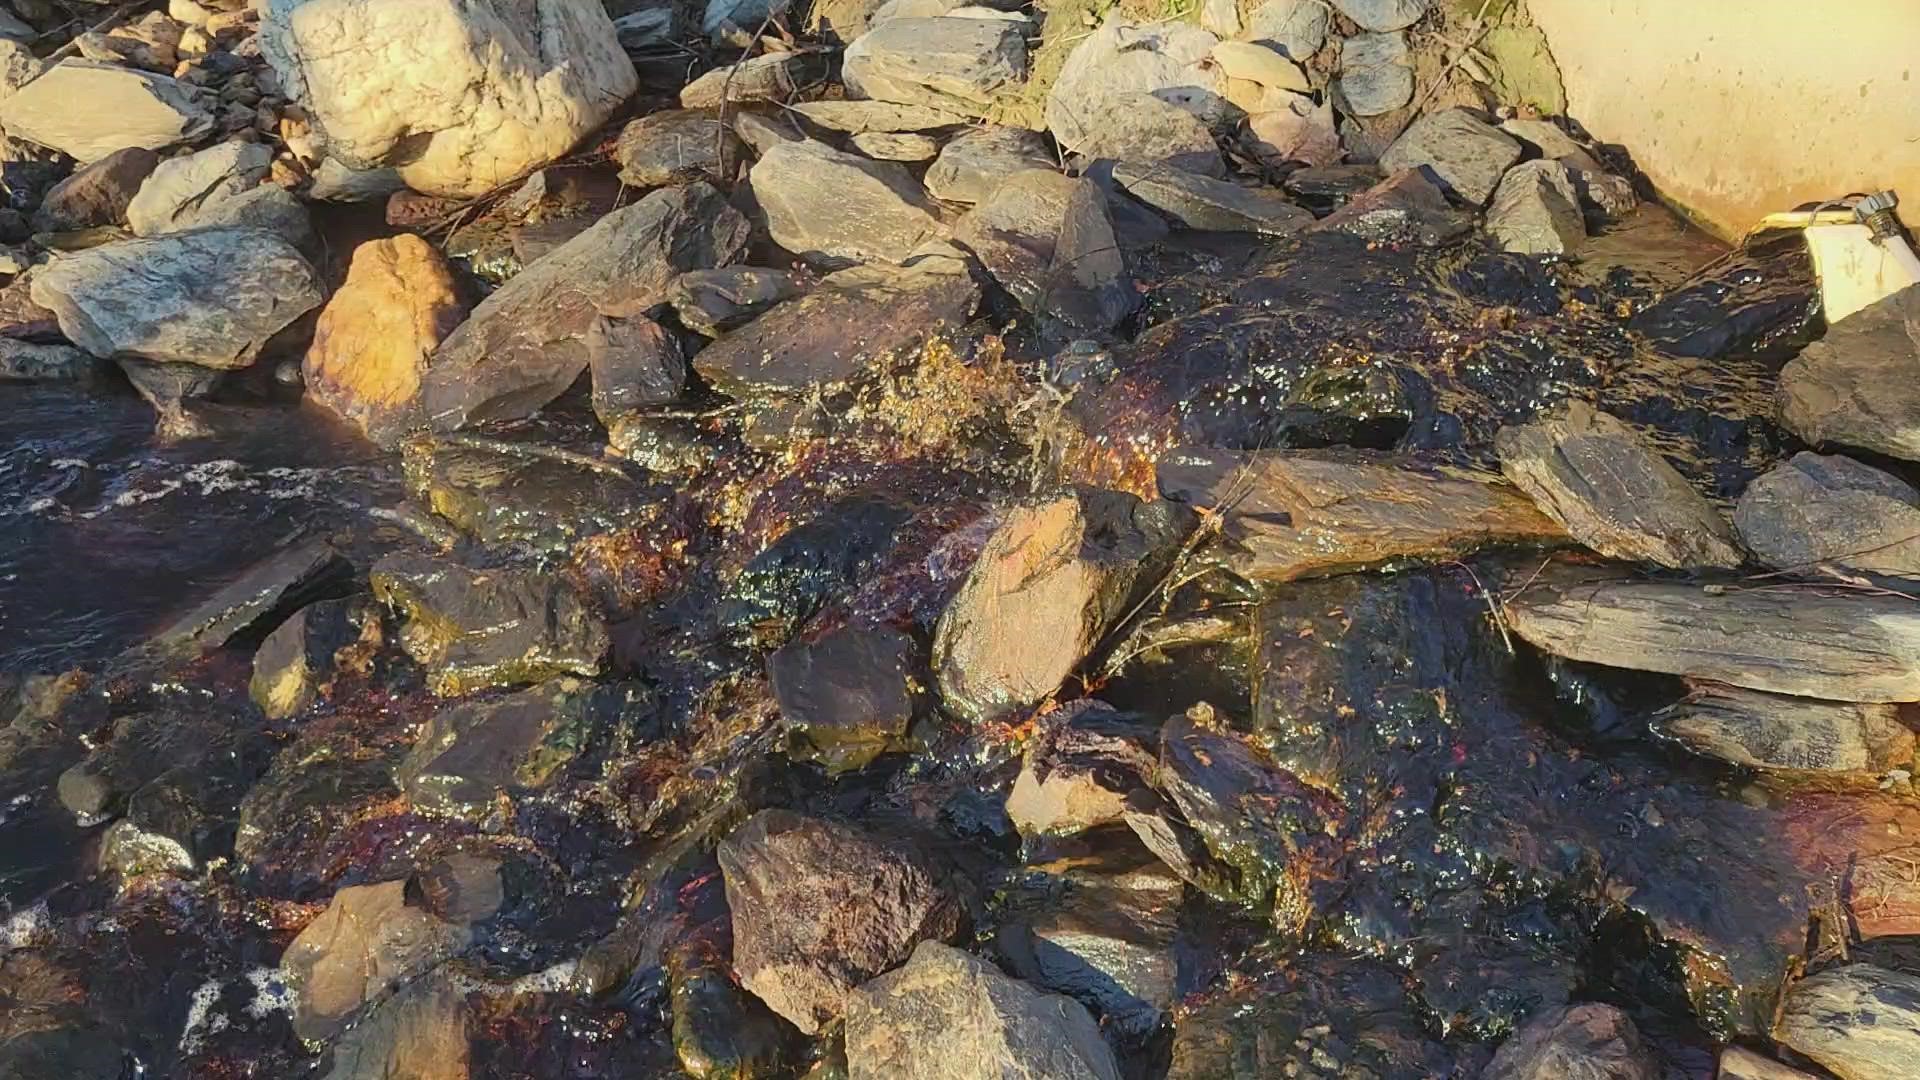 A local man believes that a nearby landfill is dumping harmful chemicals in the creek.